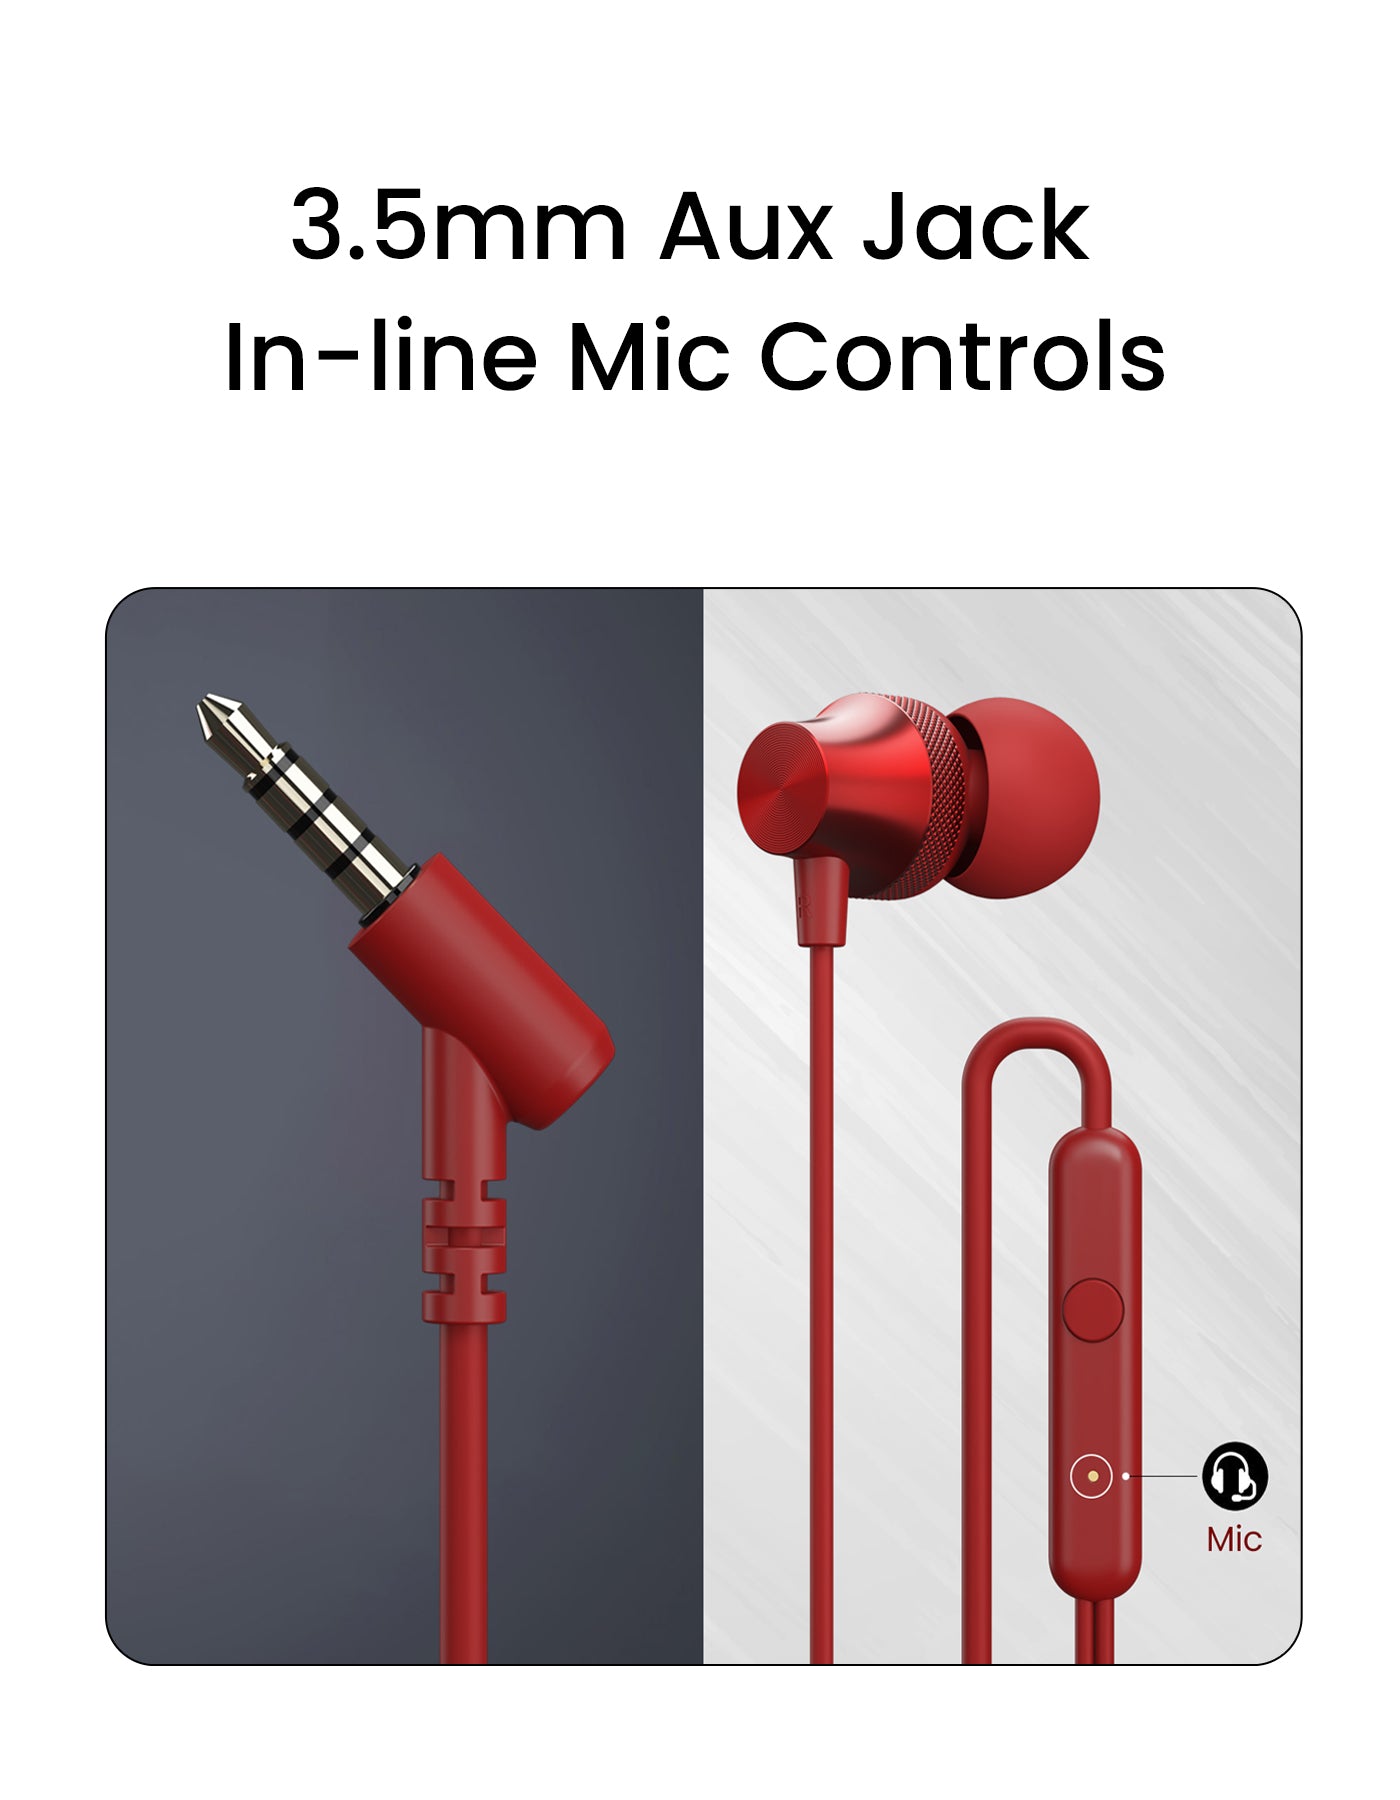 Portronics conch beat A wire earphone with 3.5mm aux jack and in-line mic controls